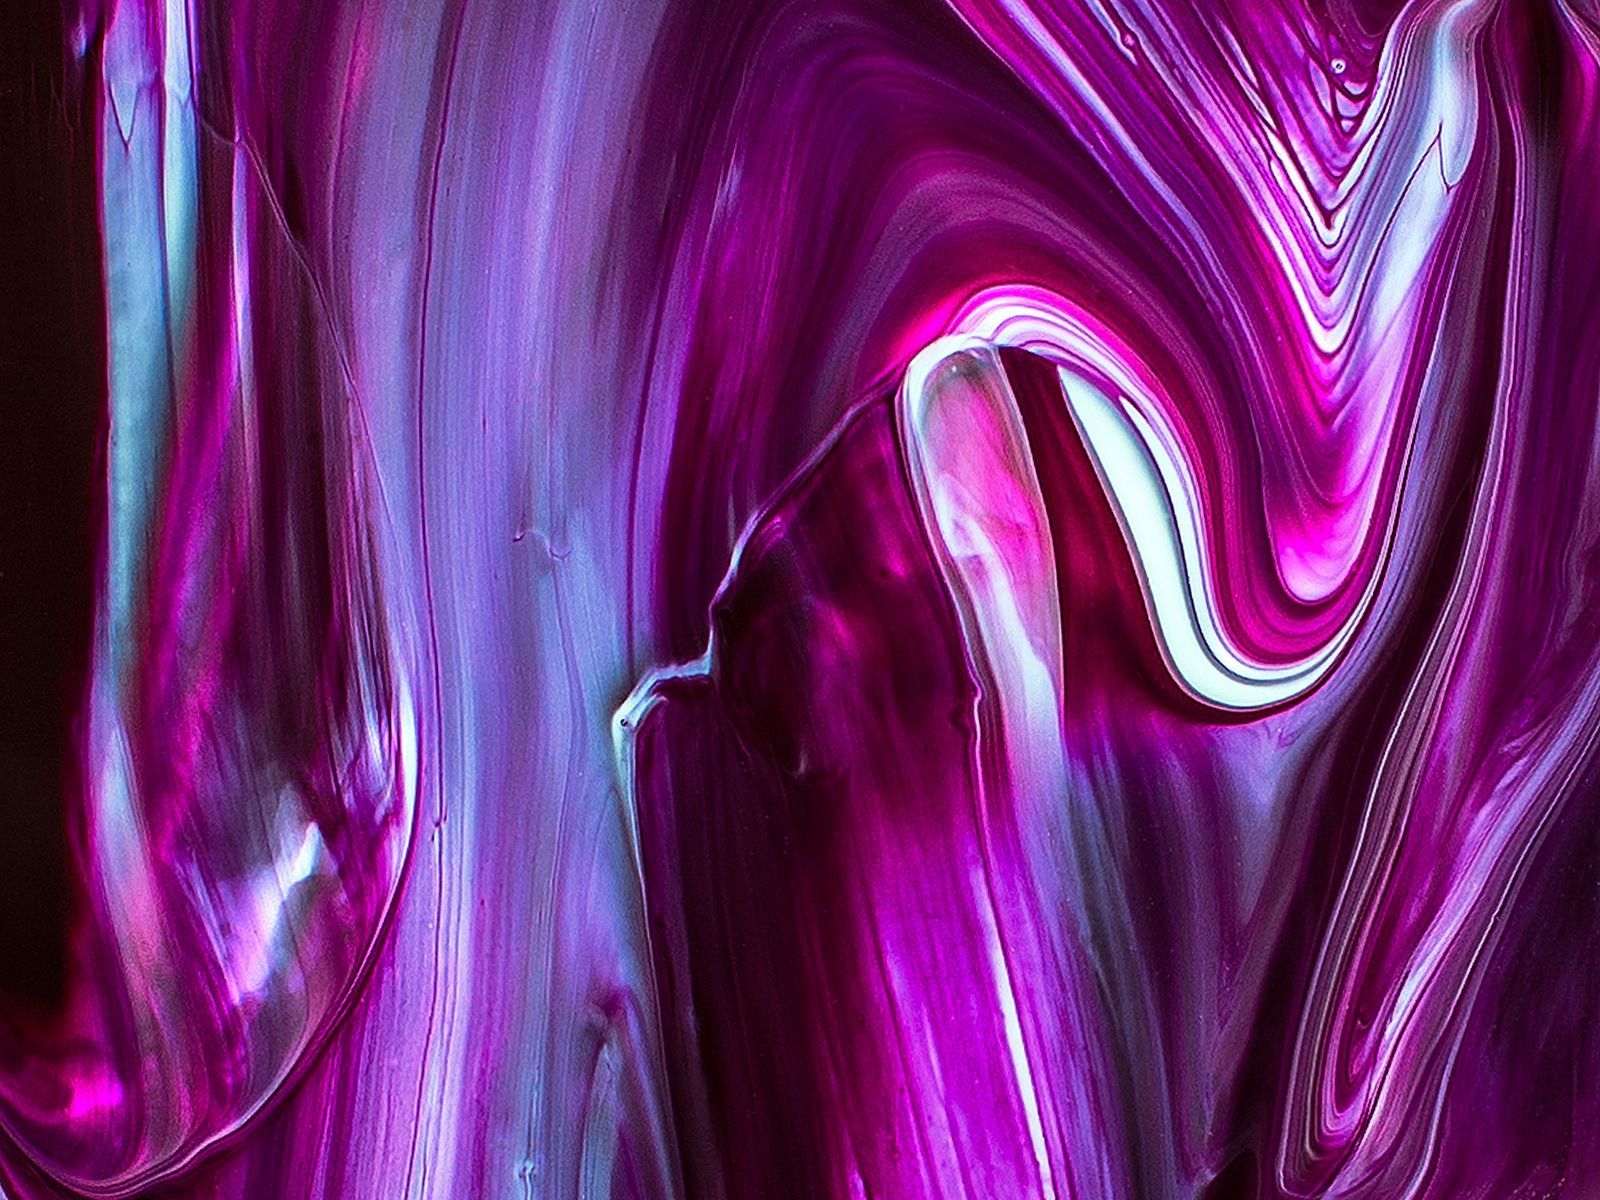 Download wallpaper 1600x1200 paint, drips, lines, lilac, bright standard 4:3 HD background